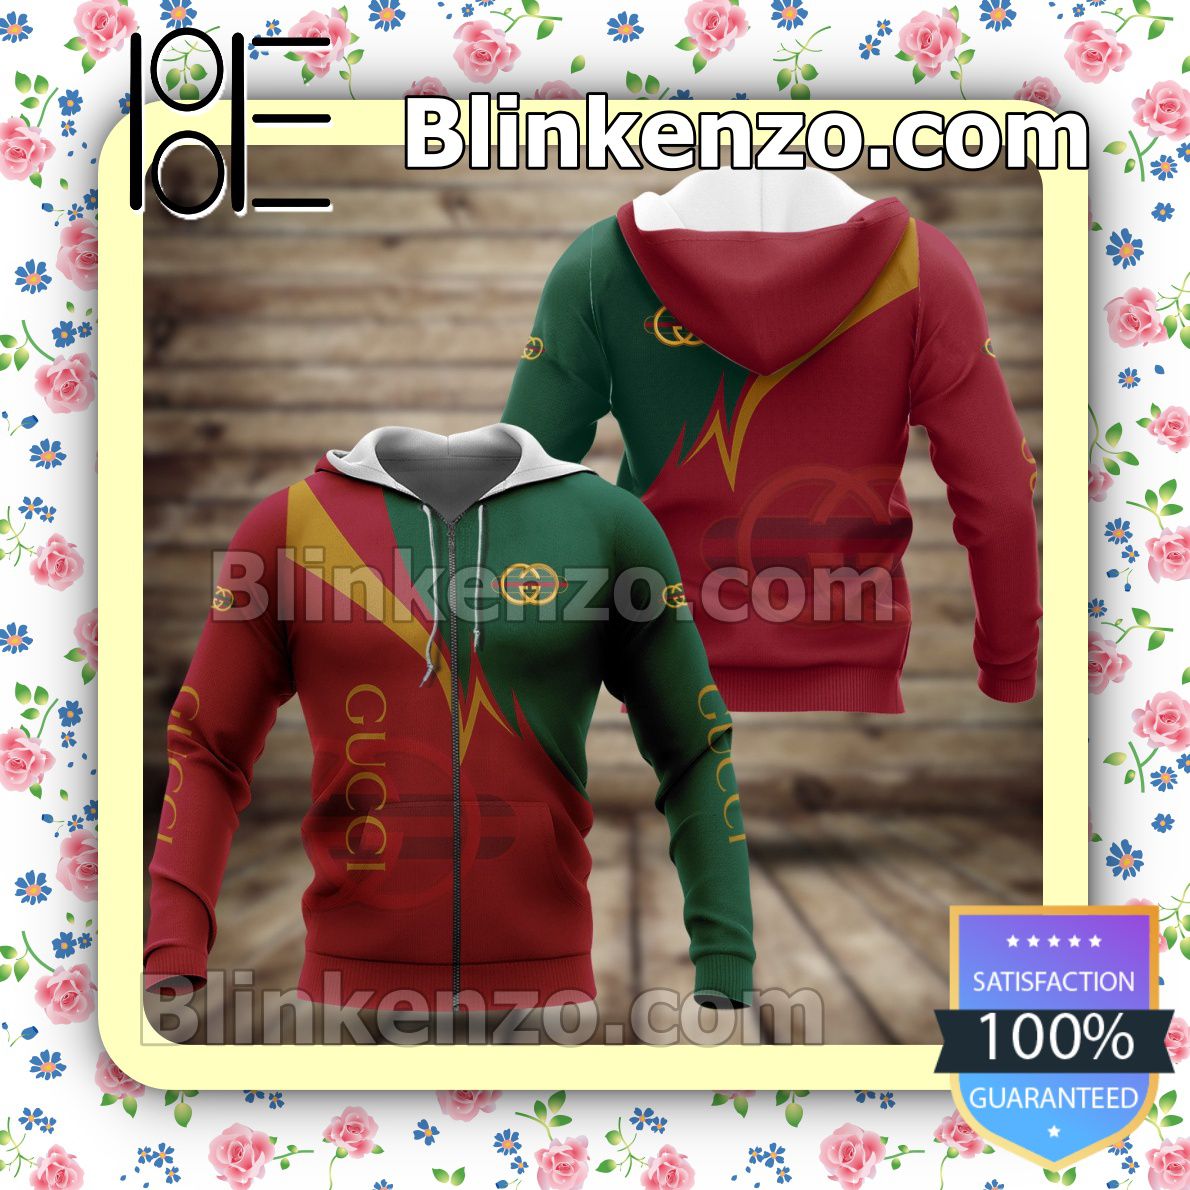 Sale Off Gucci Logo Mix Color Red Green And Yellow Full-Zip Hooded Fleece Sweatshirt